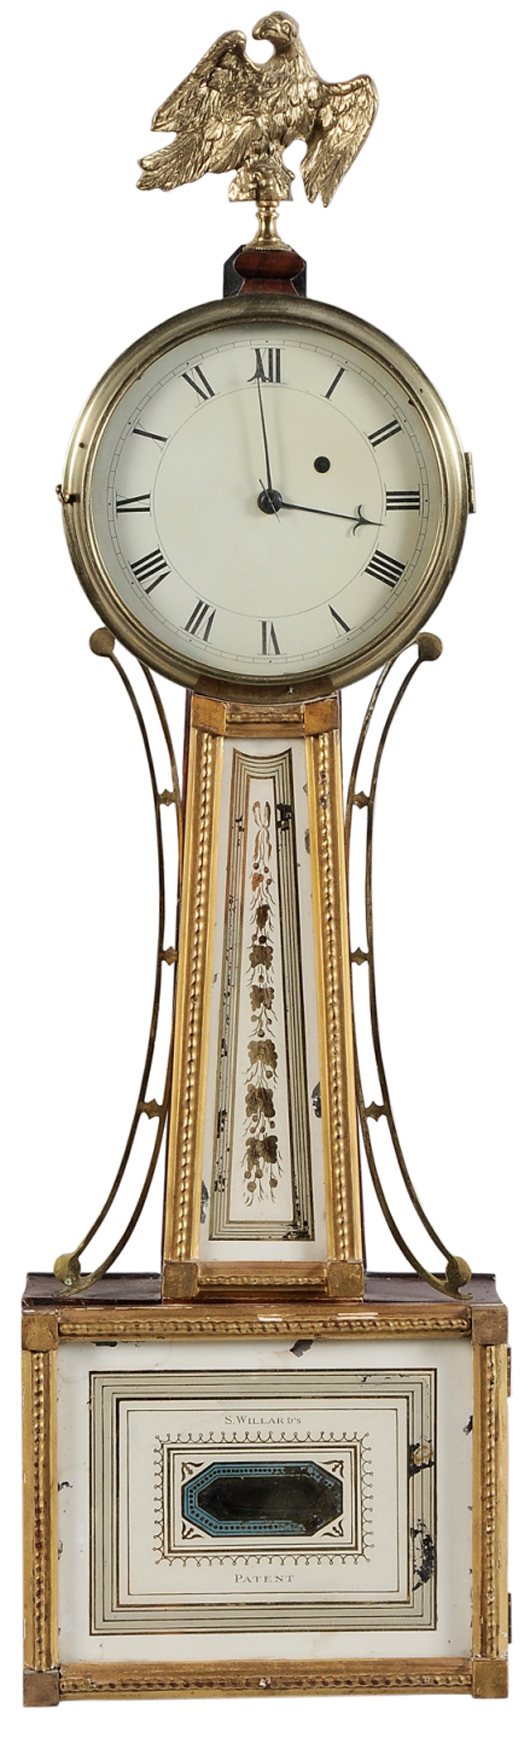 One of five banjo clocks consigned by Mr. and Mrs. Levon Register, this one topped all. From the early 19th century by Simon Willard of Roxbury, Mass., it brought $12,650 (est. $4000-$6000). Image courtesy of Brunk Auctions.